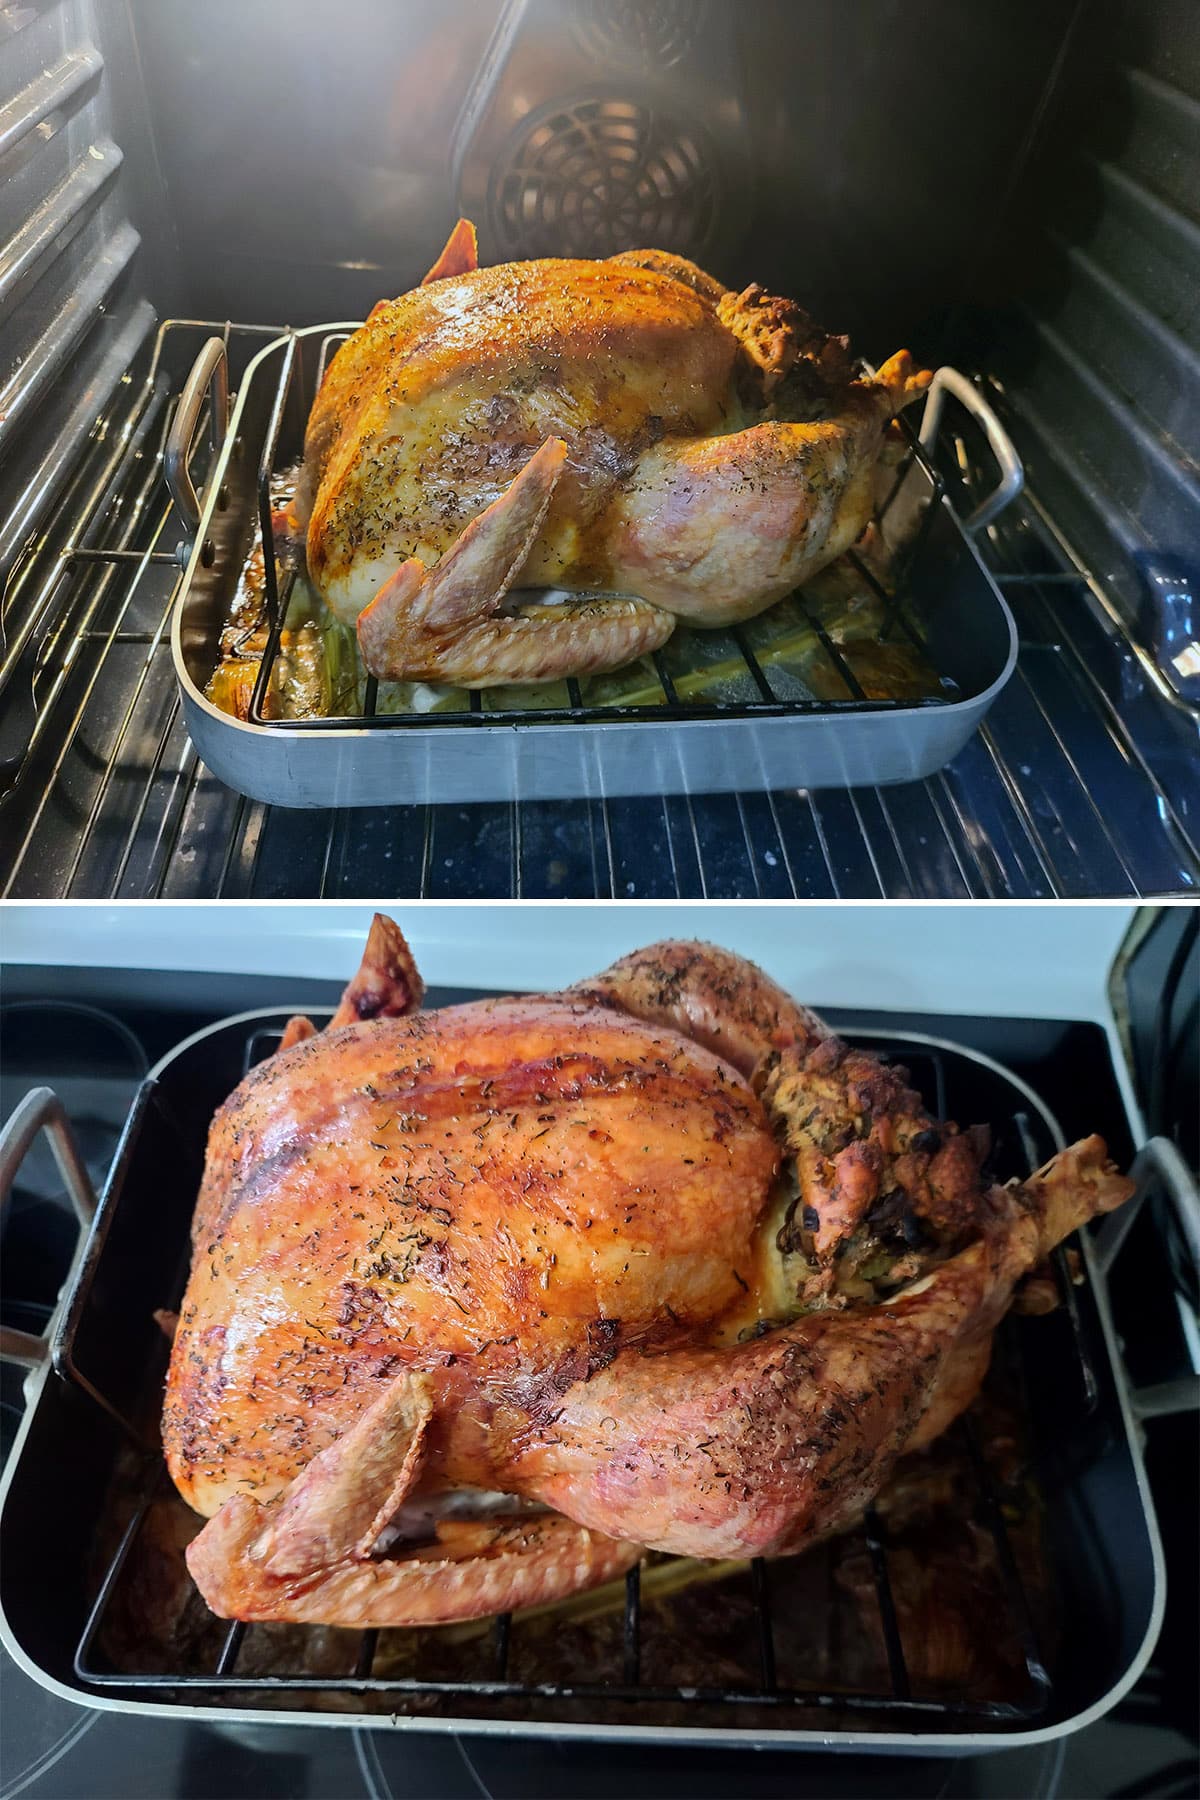 A 2 part image showing the roasted turkey in the oven and on the stove top, after roasting.